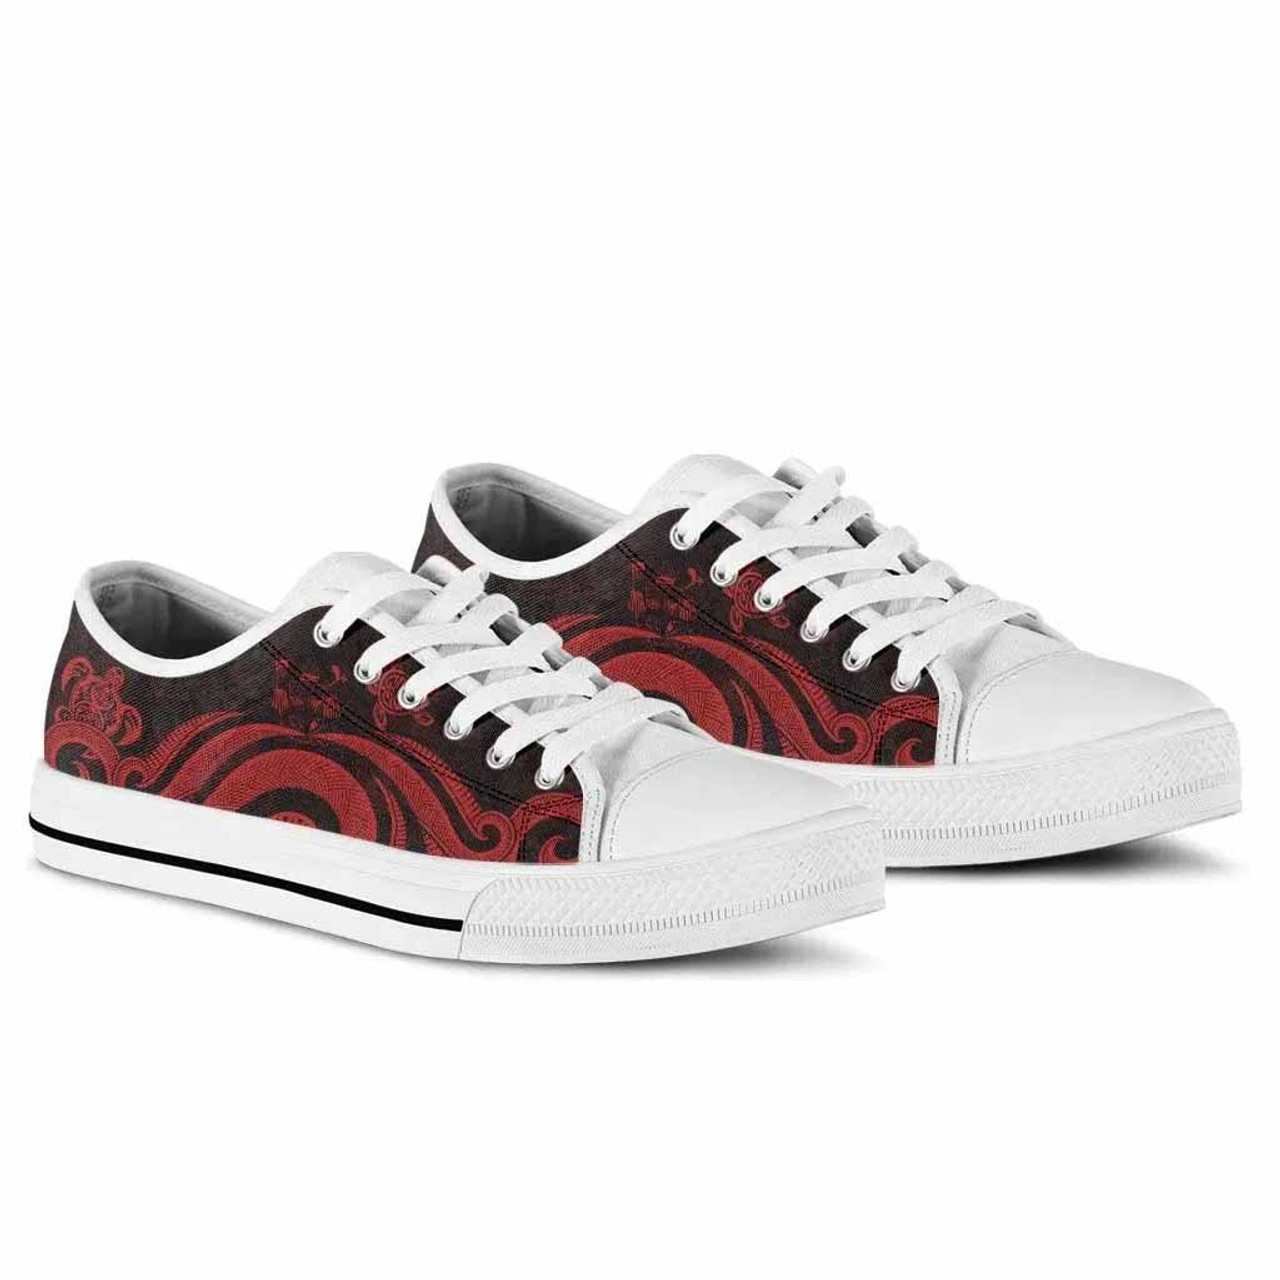 Fiji Low Top Canvas Shoes - Red Tentacle Turtle Crest 7